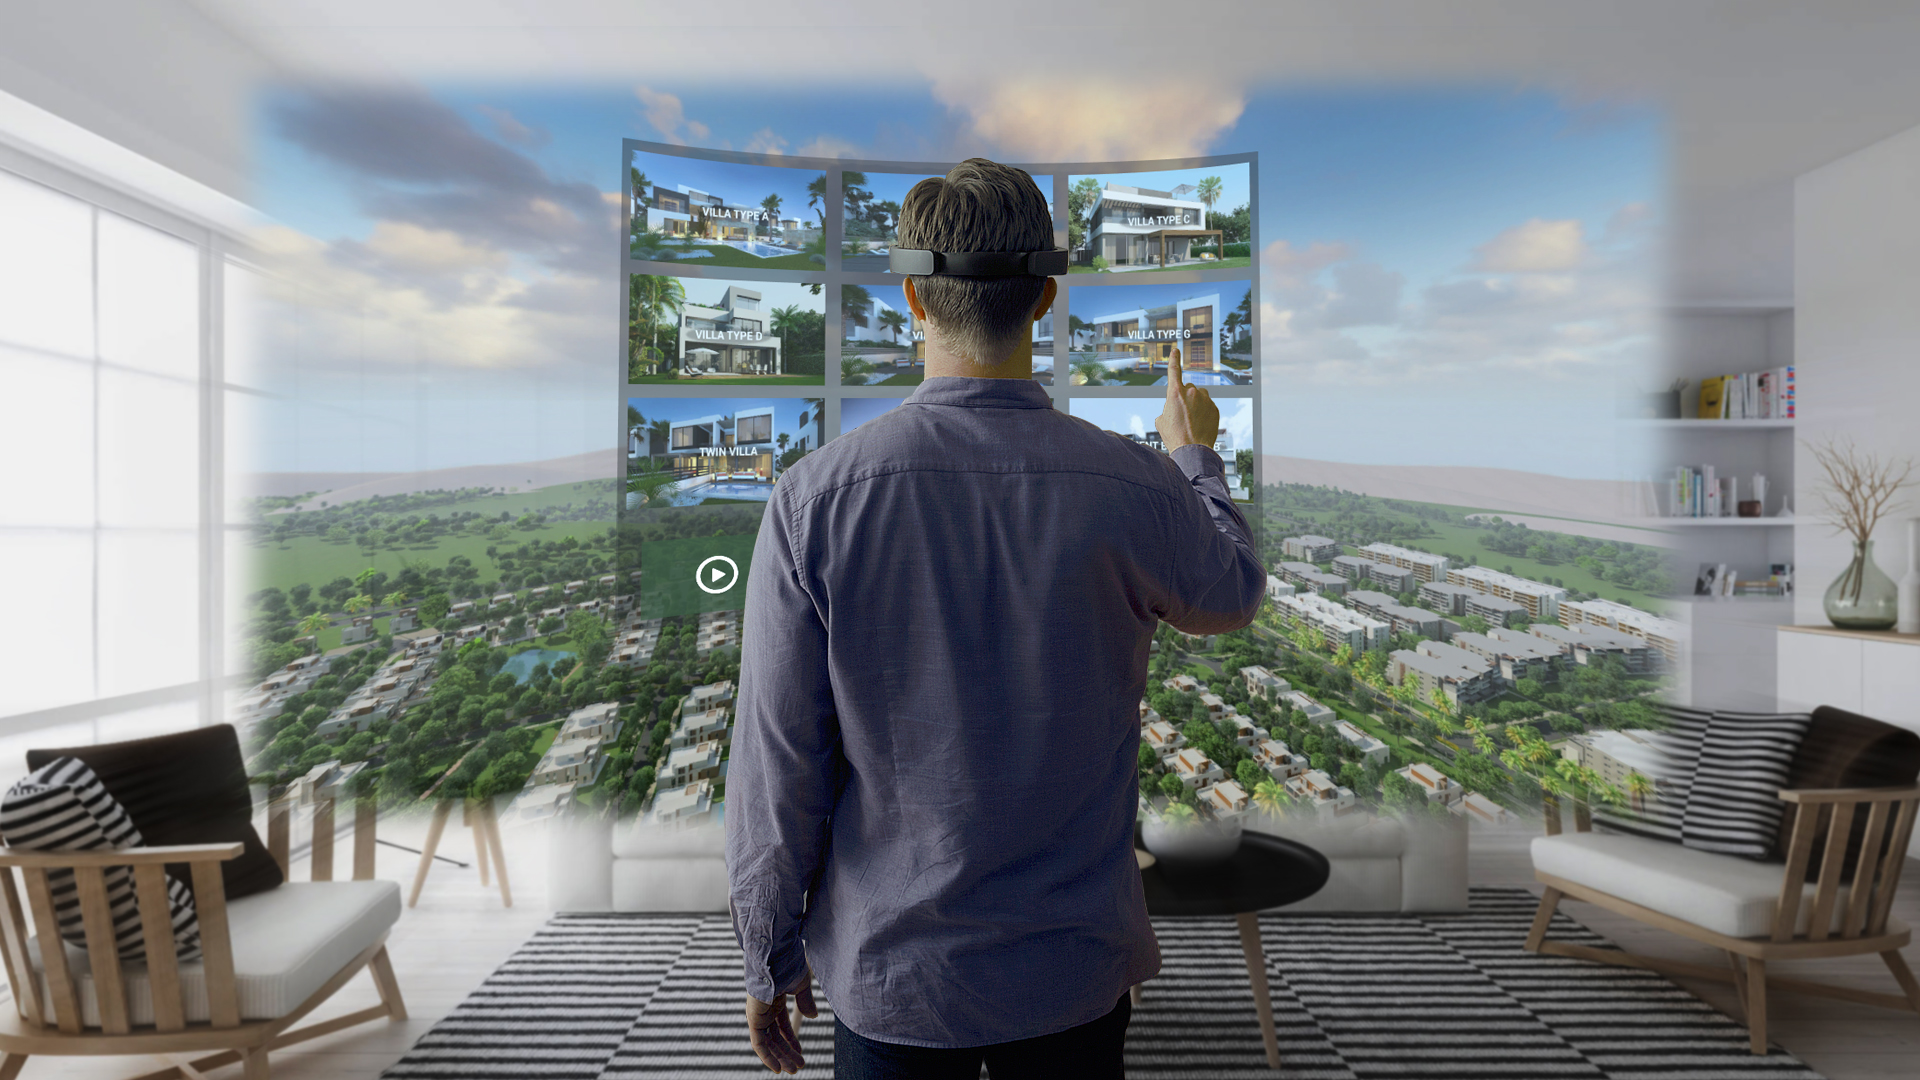 raya santo envío Best Real Estate Virtual Reality Apps: 5 Apps to Help Realtors and Clients  - IQVIS Inc.